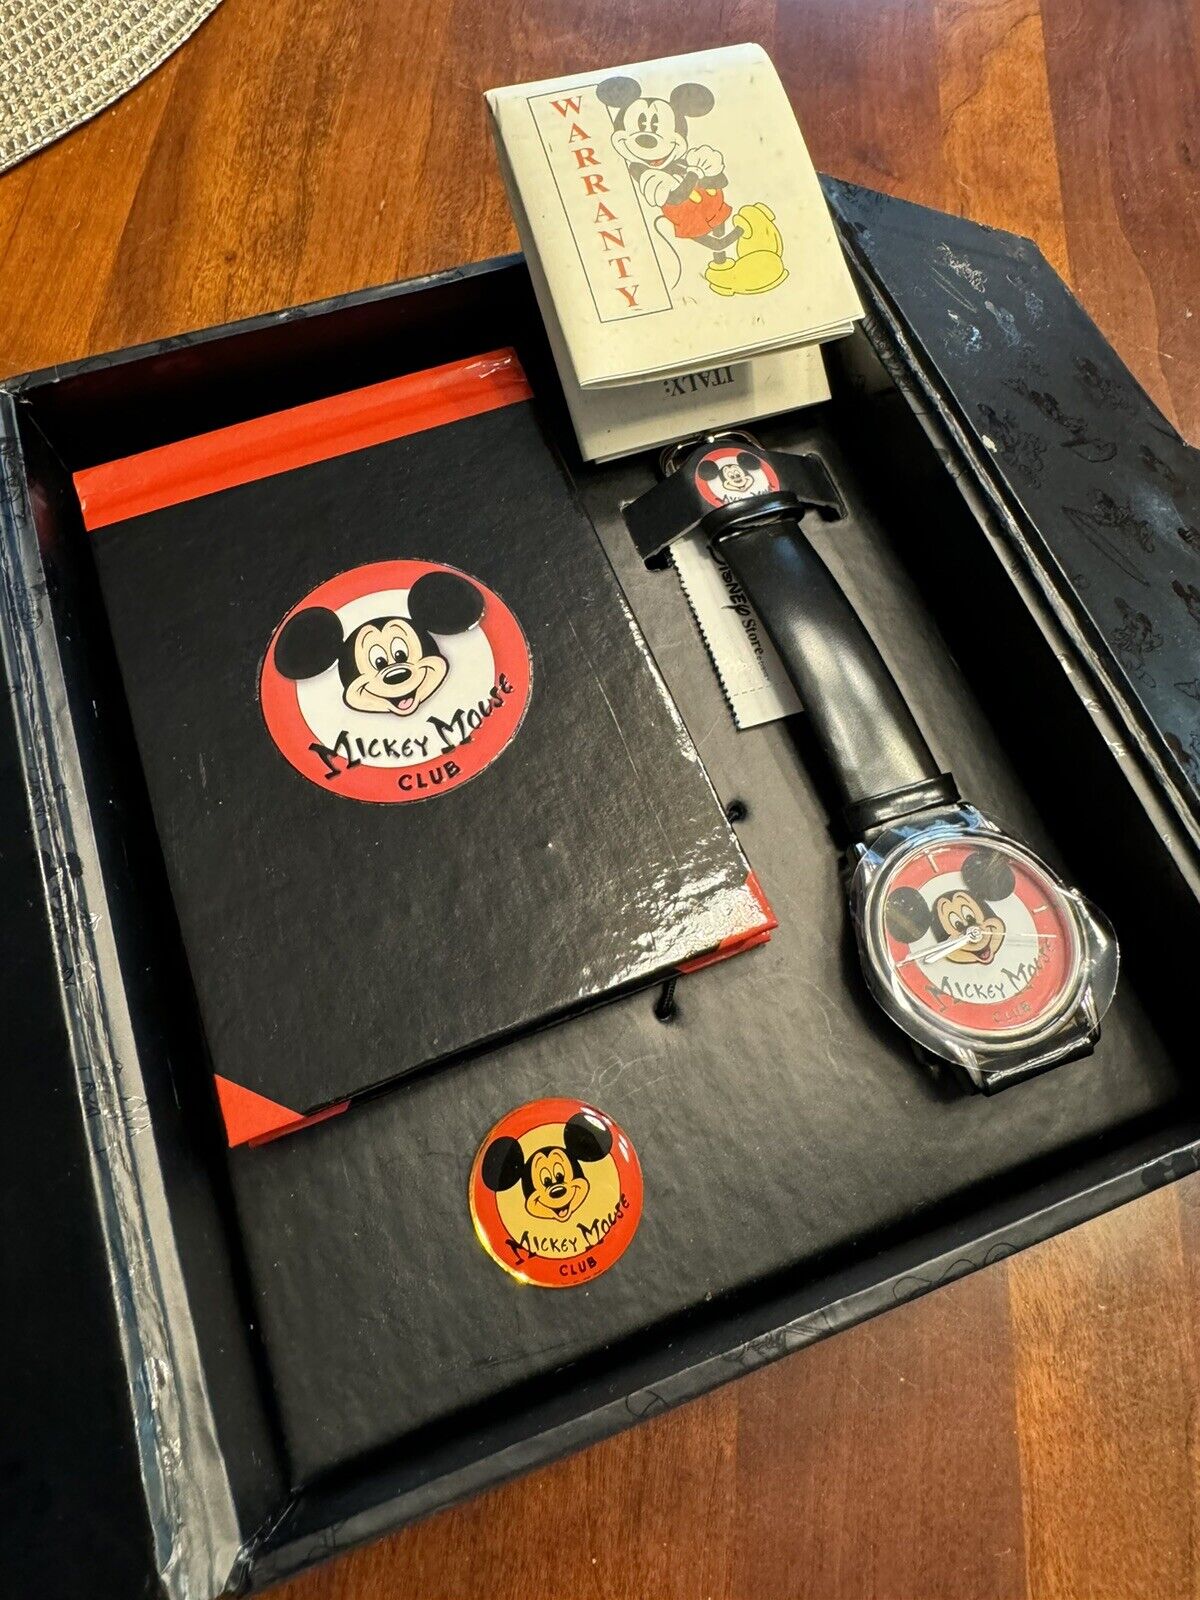 Disney - Mickey Mouse Club Fossil Watch w/Lapel Pin & Notebook